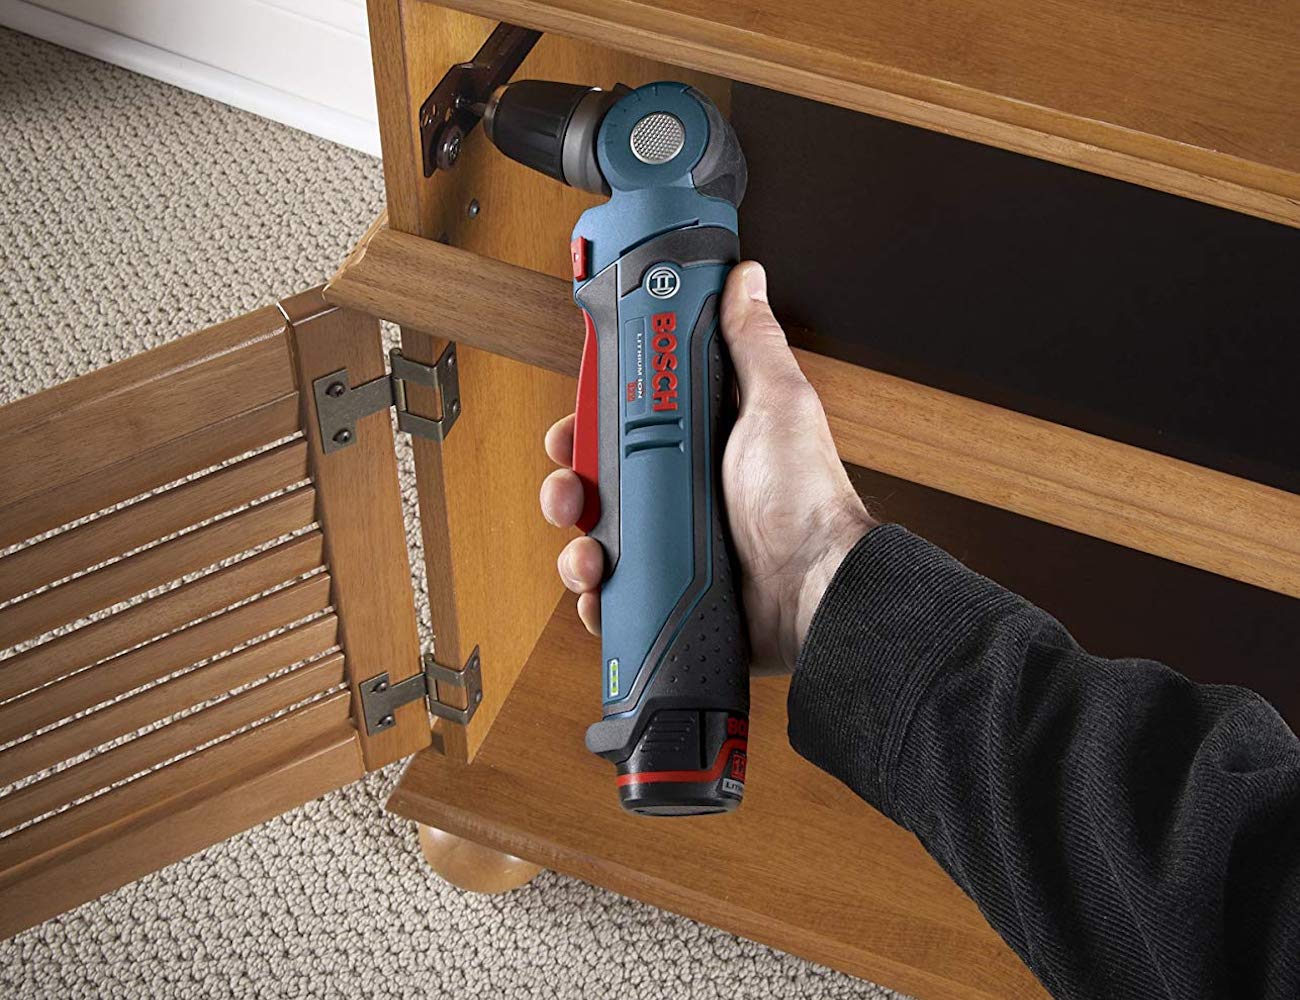 Bosch PS11 Angle Drill Driver articulates up to 180 degrees